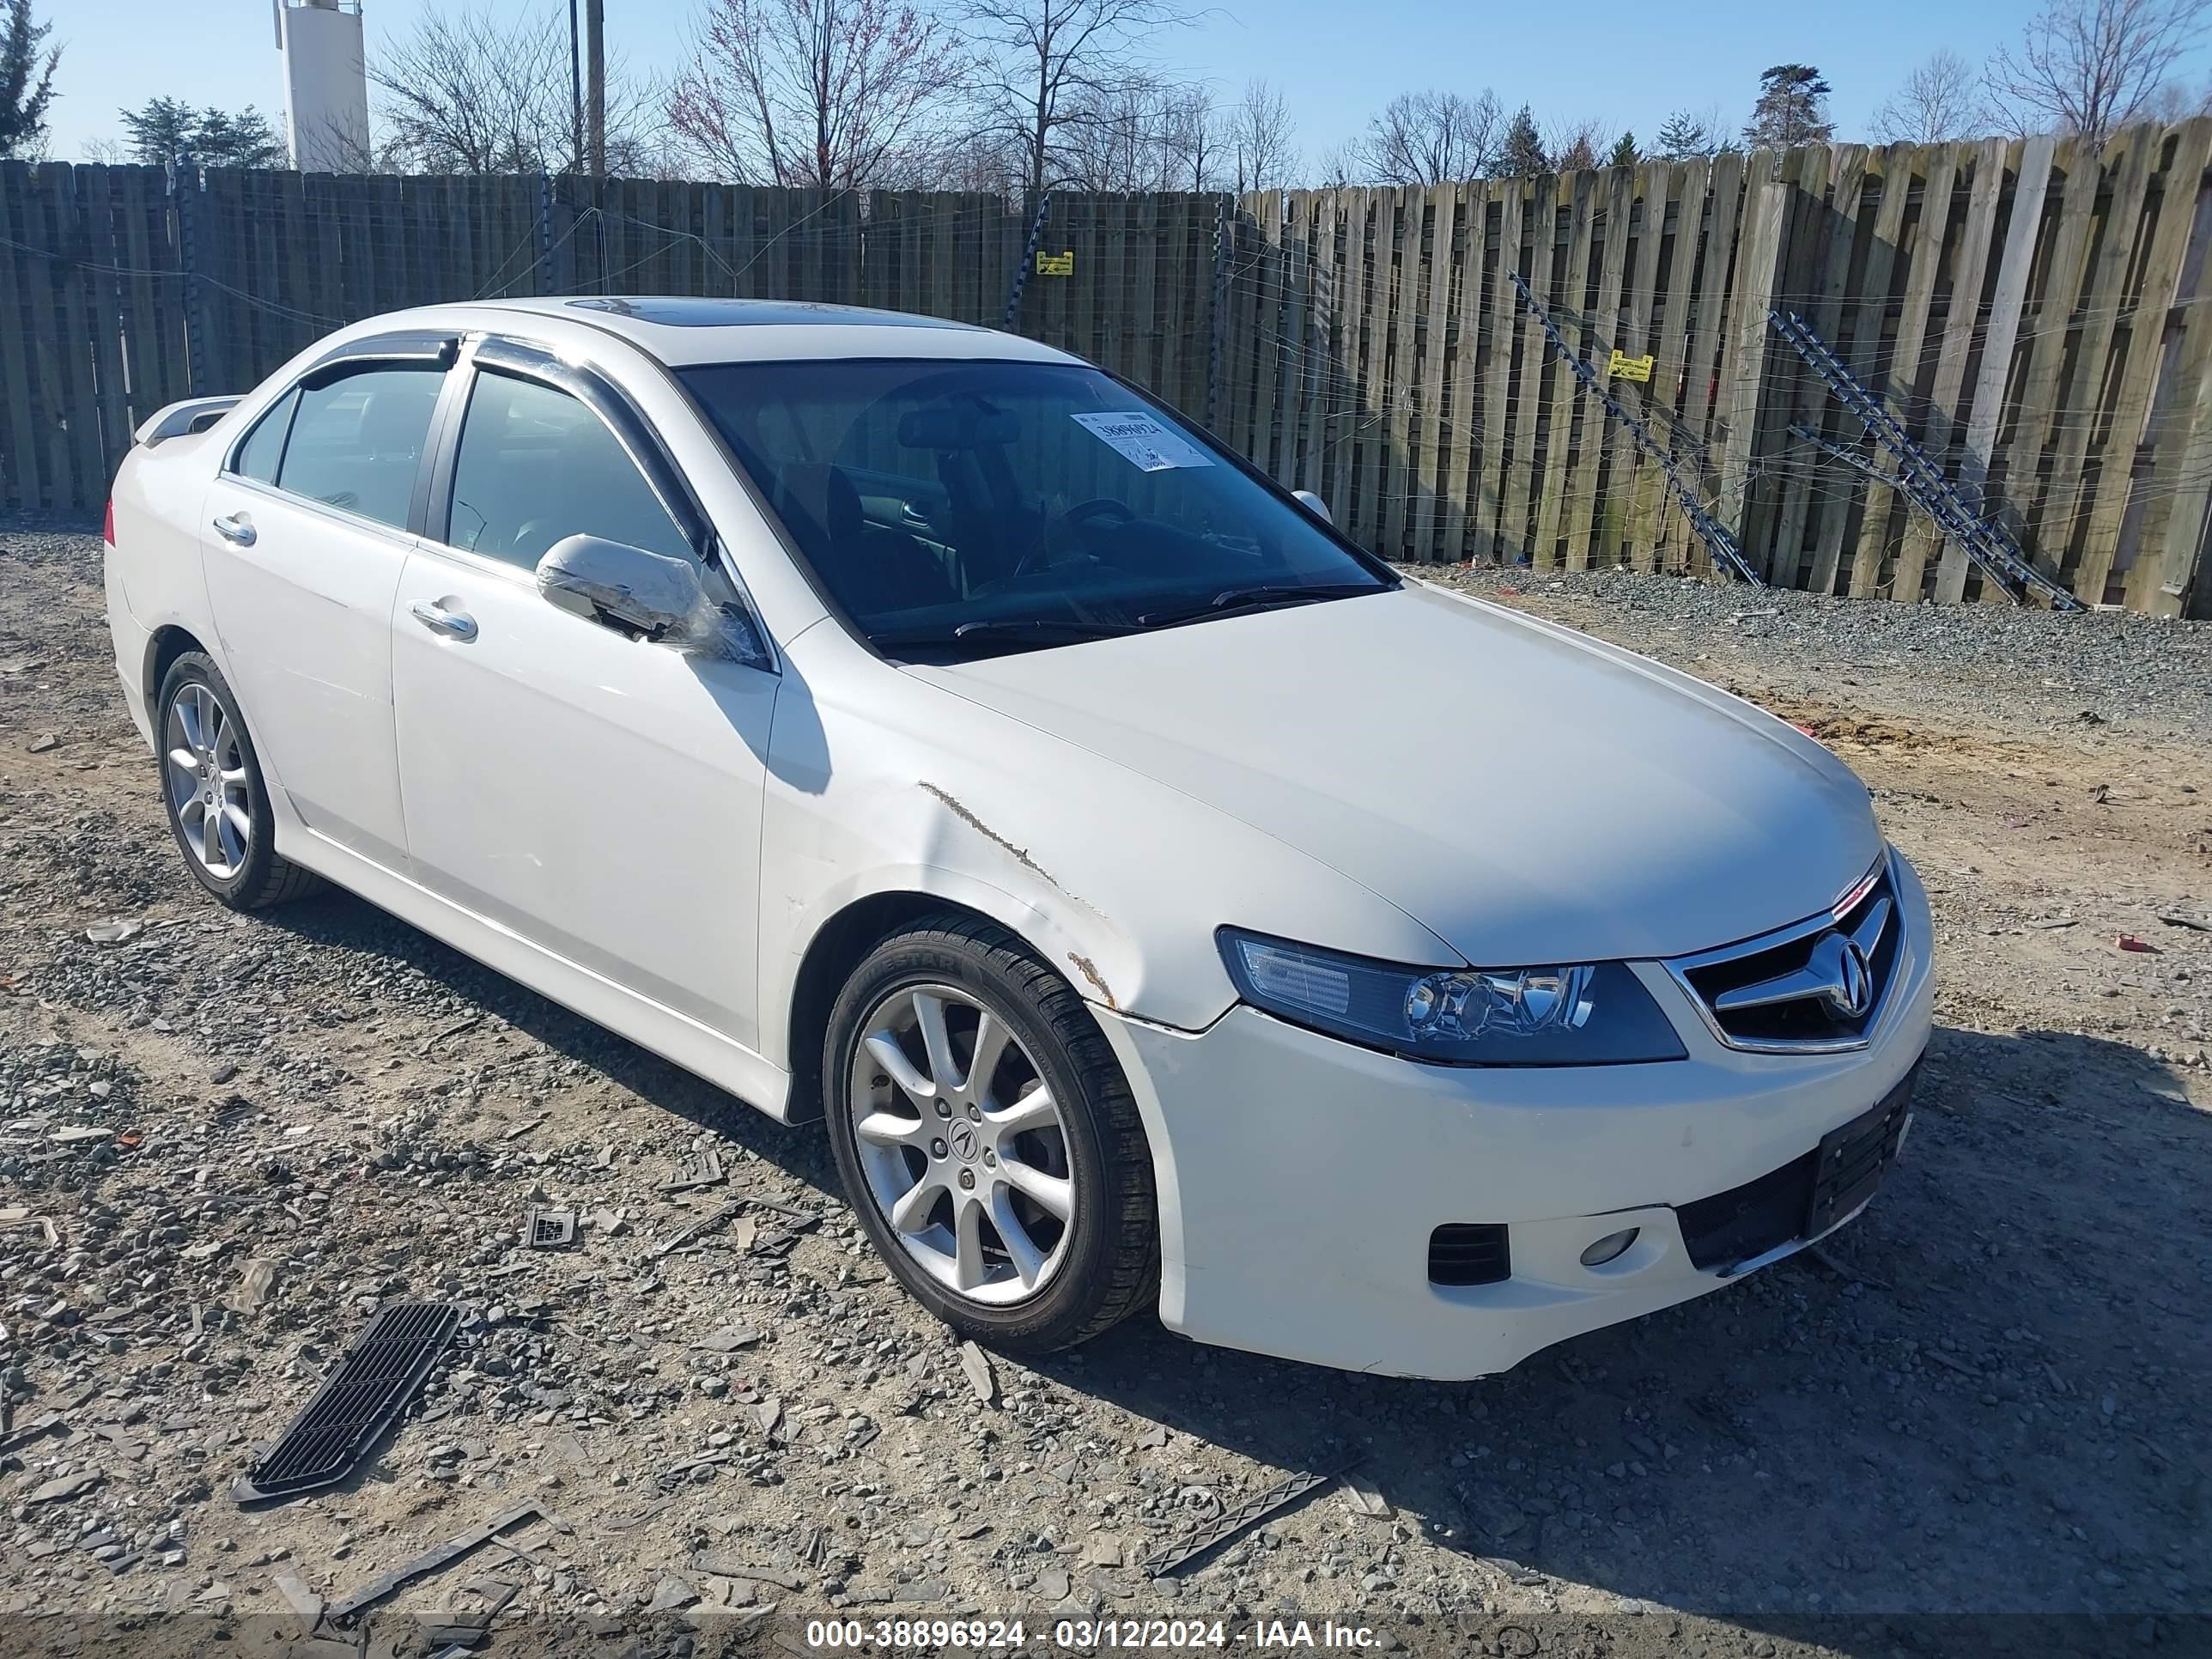 acura tsx 2008 jh4cl96878c011558